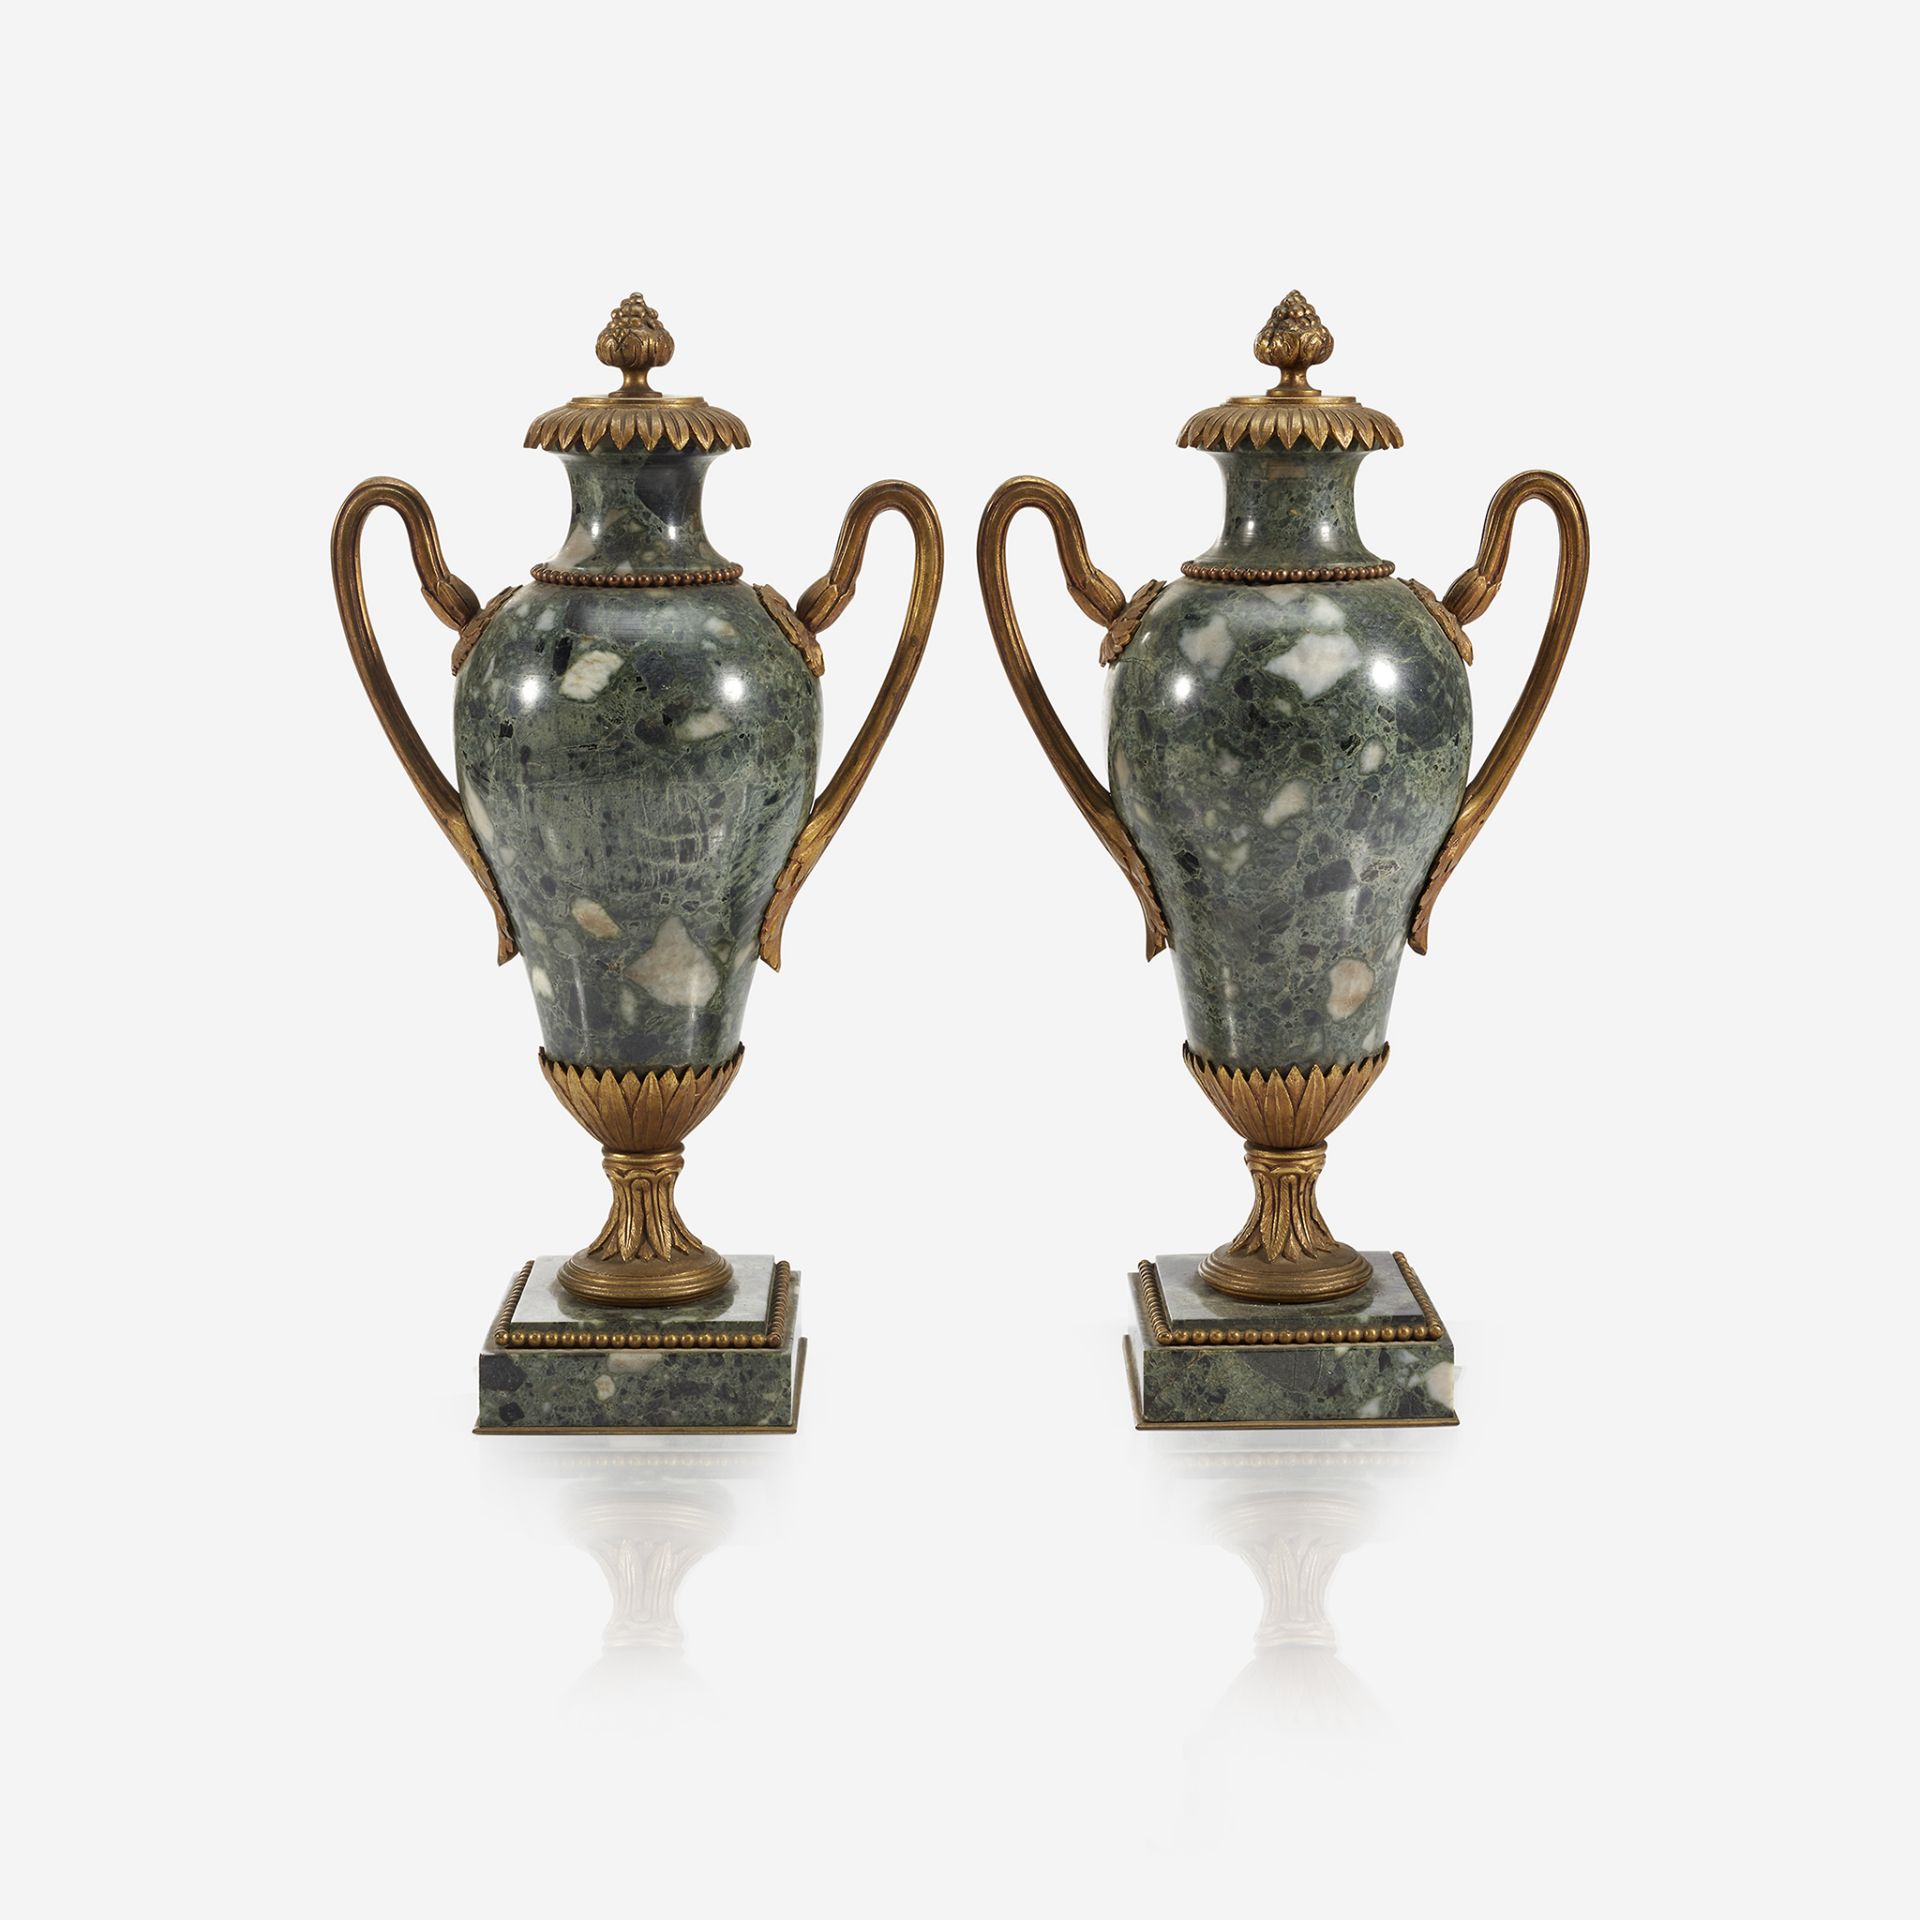 A pair of Louis XVI style gilt-bronze mounted specimen marble vases, Late 19th/early 20th century